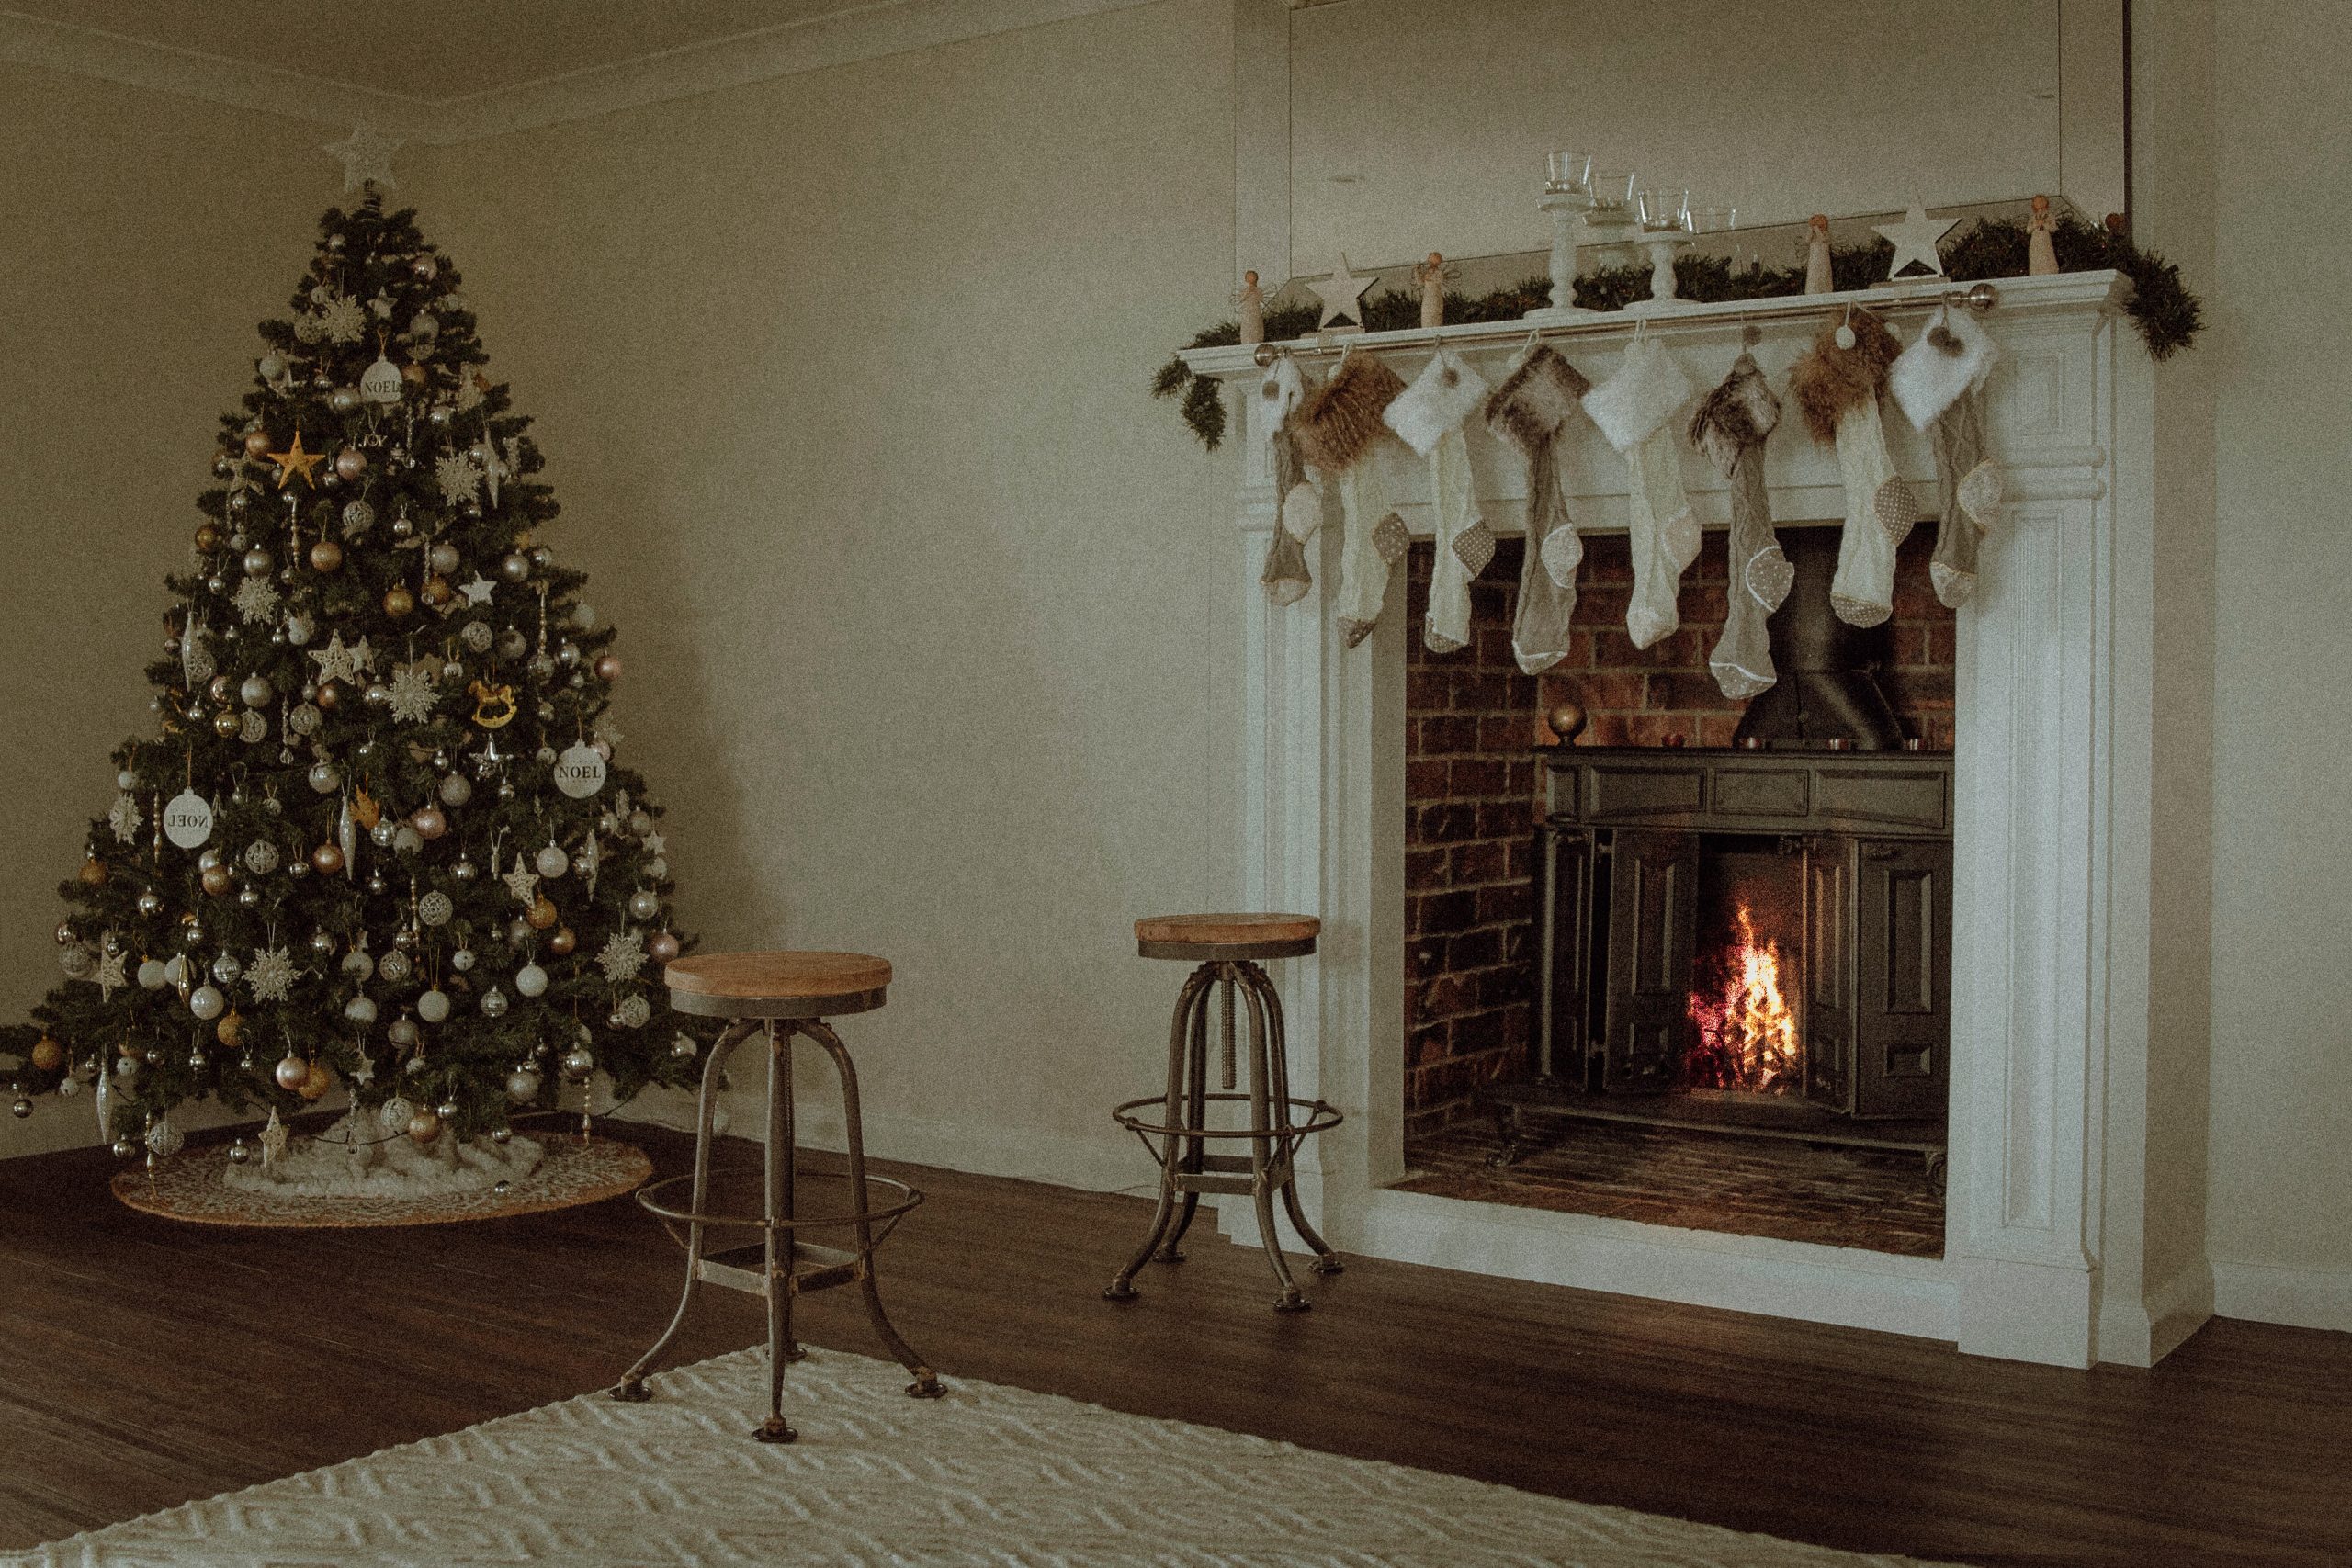 A Christmas tree featuring white decorative elements in a white room with a fireplace.